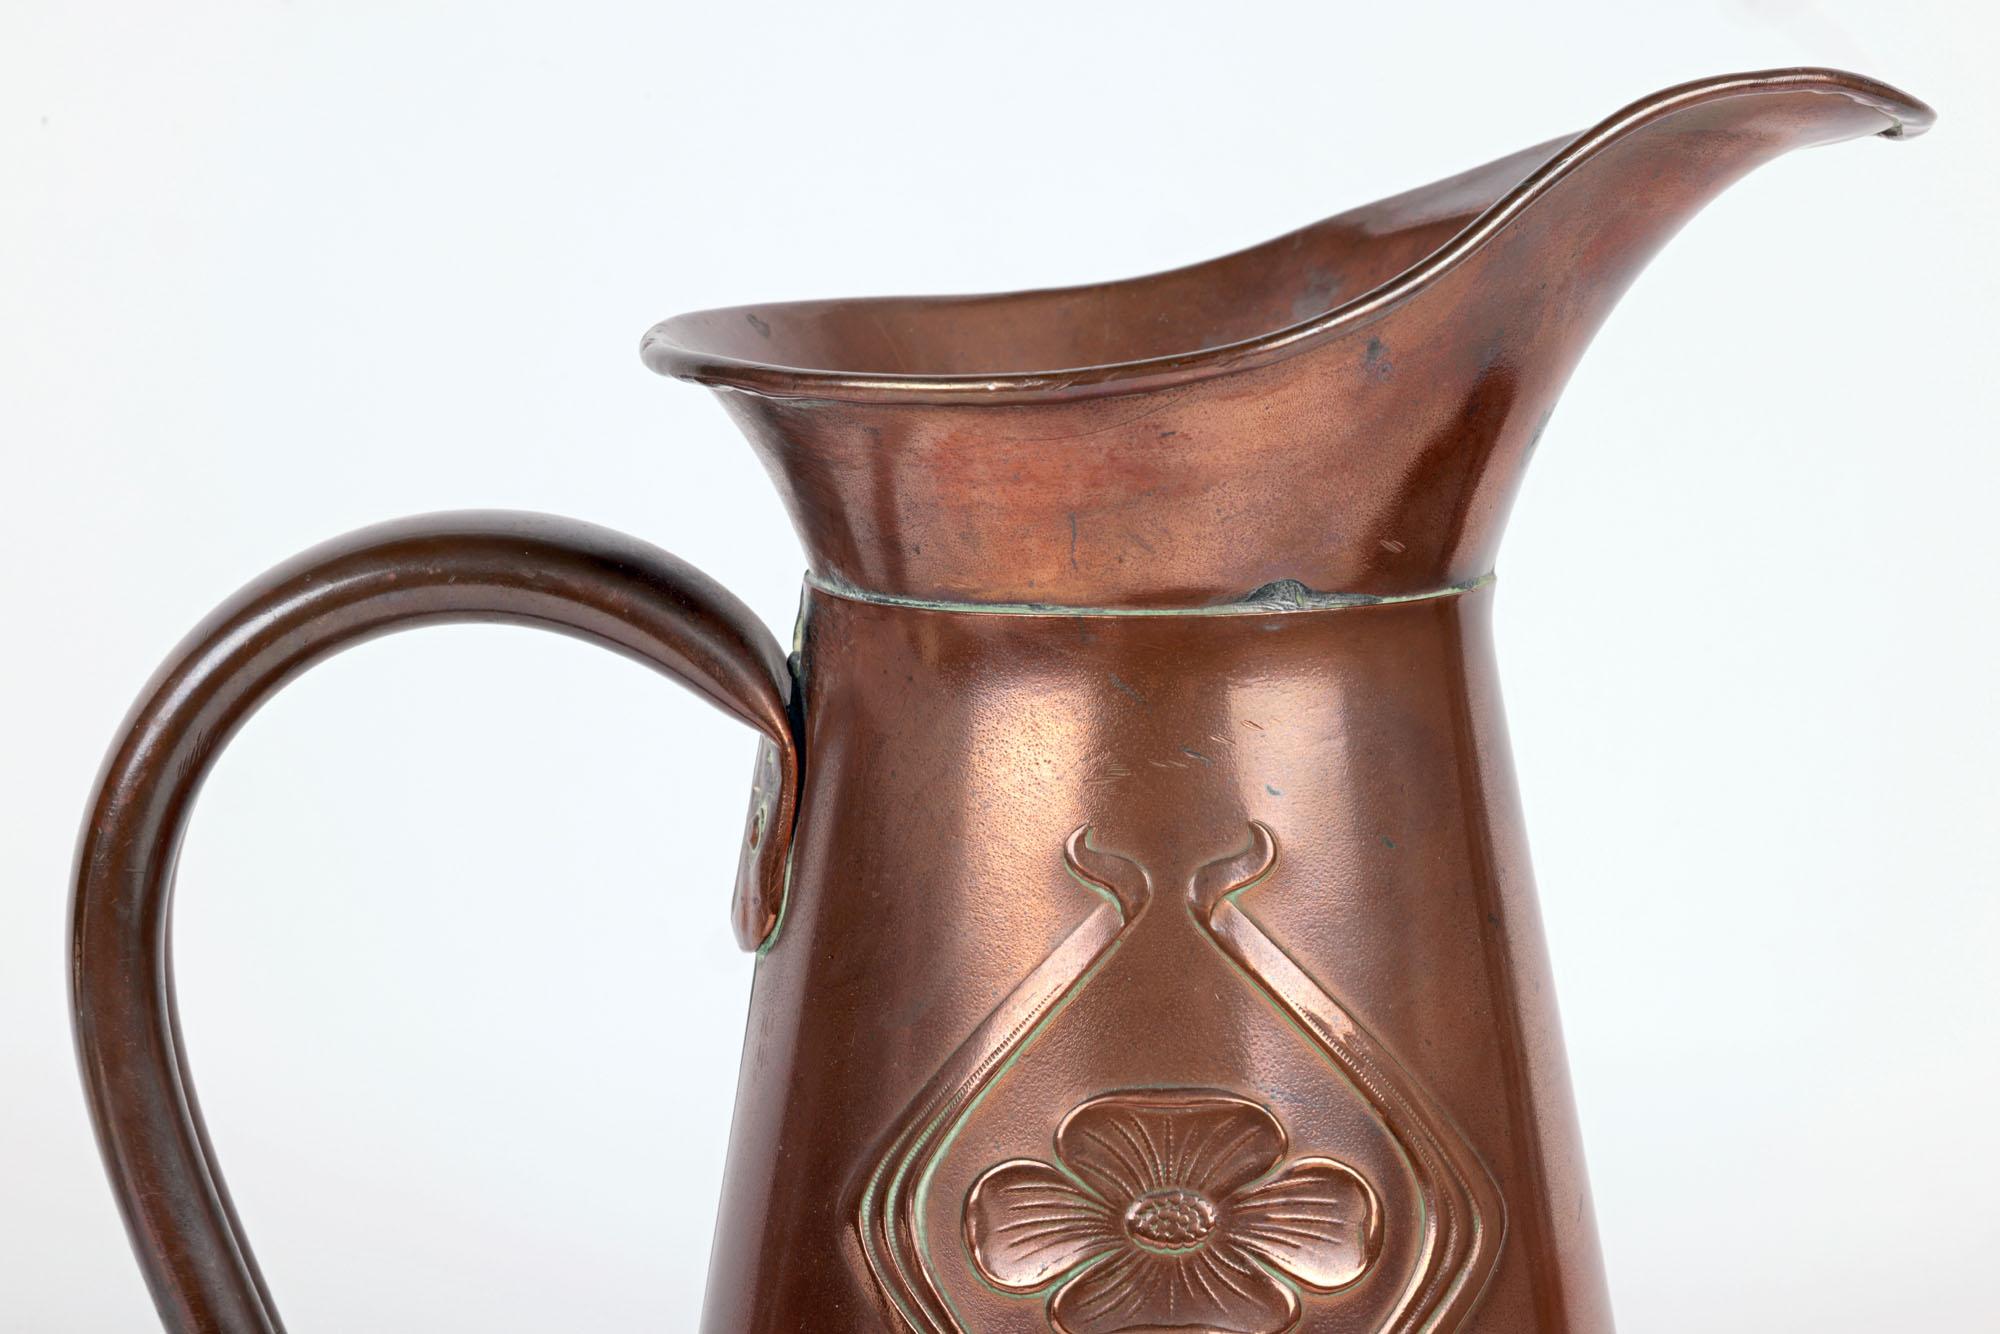 A stylish English Art Nouveau large copper pitcher decorated in a stylized floral pattern by renowned Bilston based metalworkers Joseph Sankey & Sons dating from around 1900. The large and tall copper pitcher has a trumpet shaped body embossed with